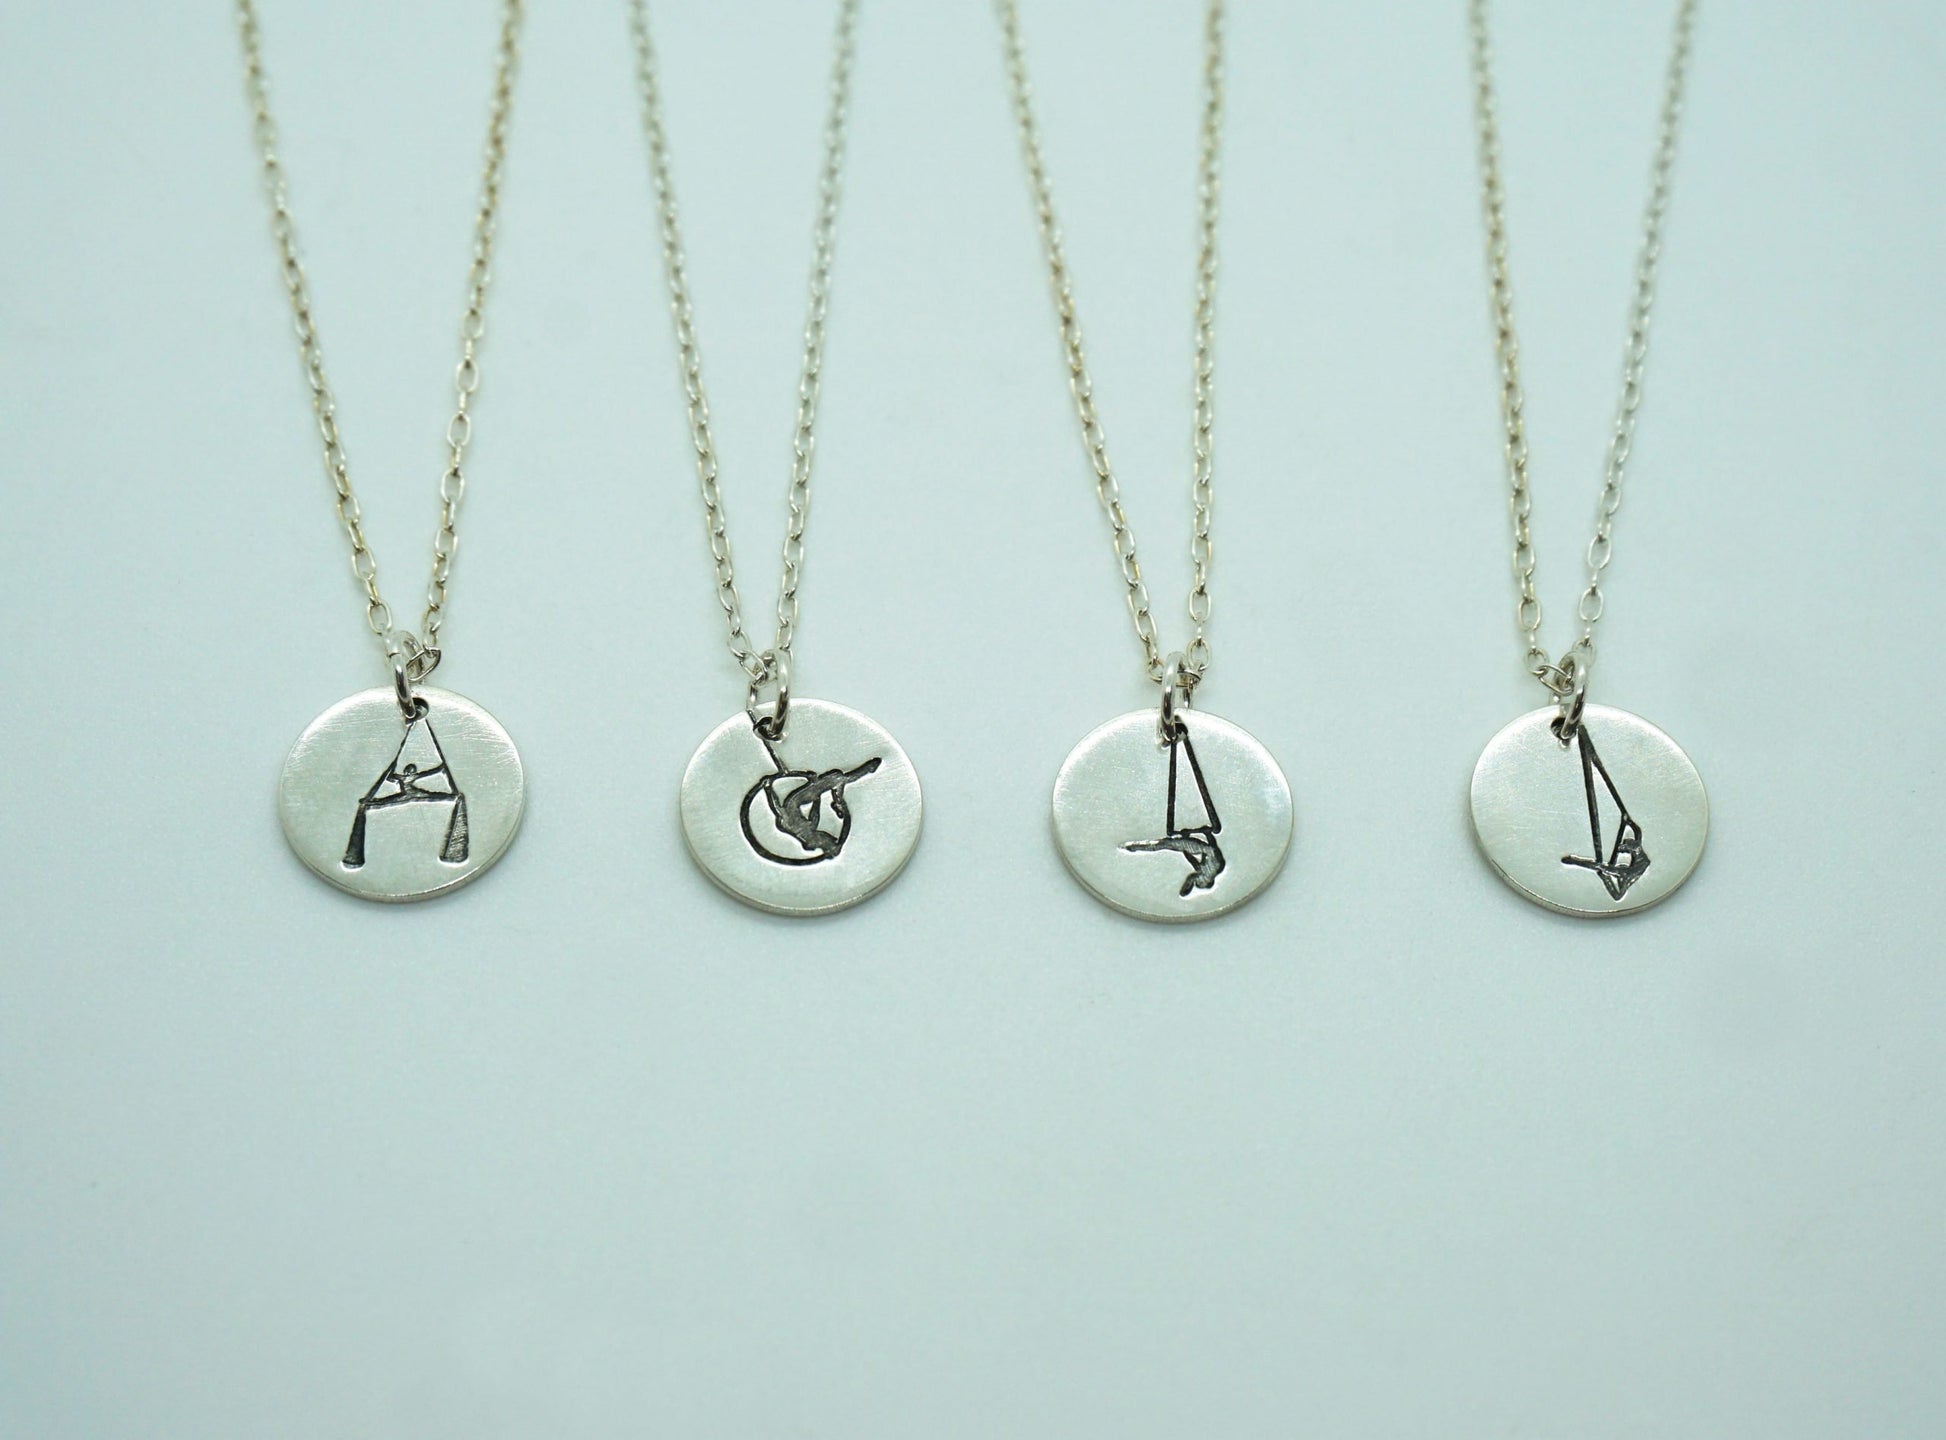 aerialists pendant necklaces sterling silver